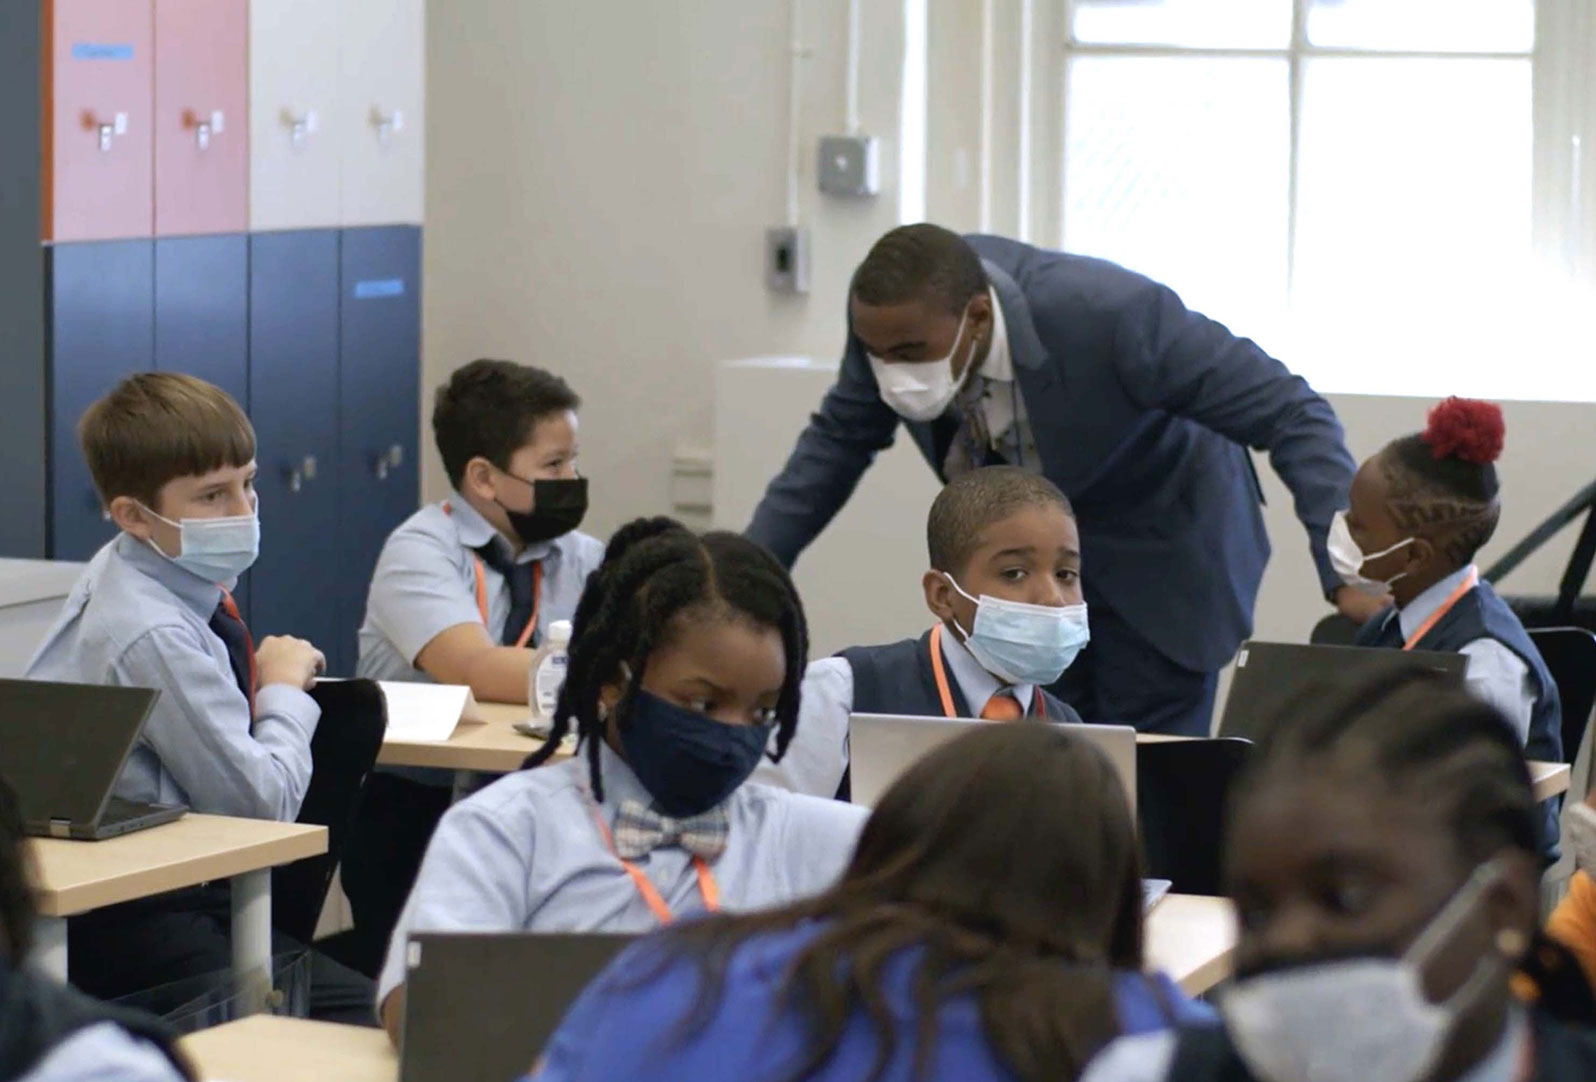 Bloomberg Philanthropies‘ investment will expand access to high-quality charter schools for students in New York City and metro areas across the United States.